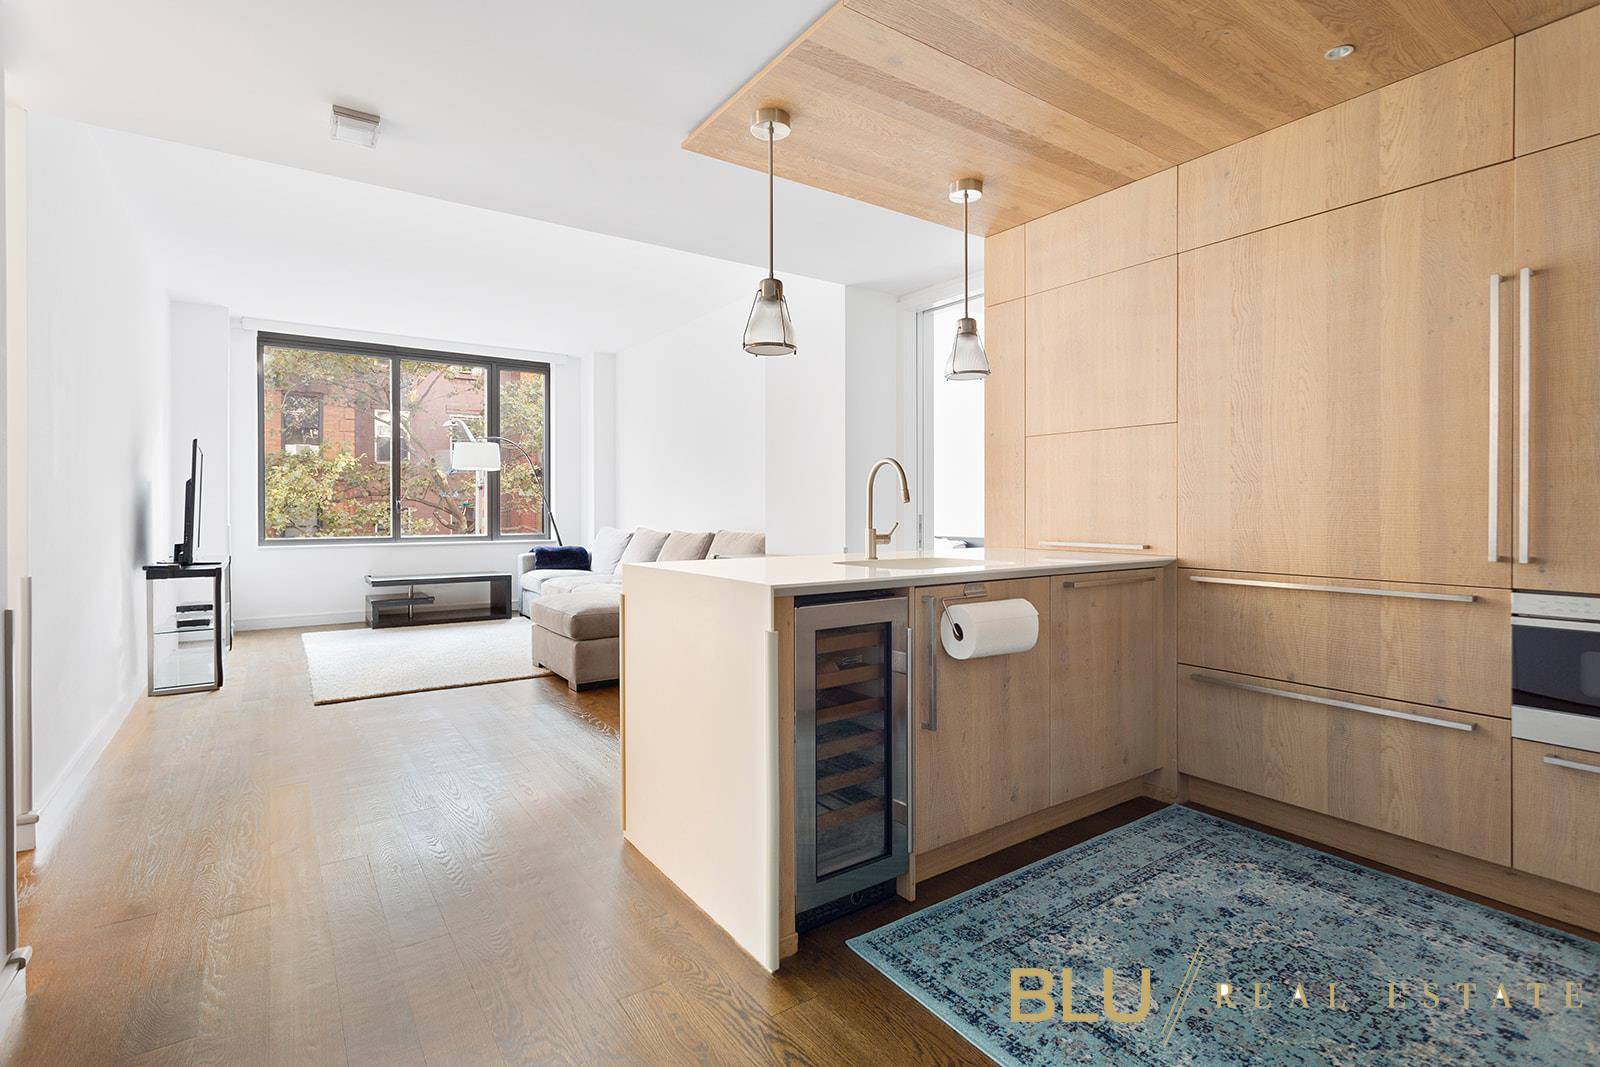 A beautiful split two bedroom two bathroom conveniently nestles in the heart of East Village at the Jefferson Condominium.